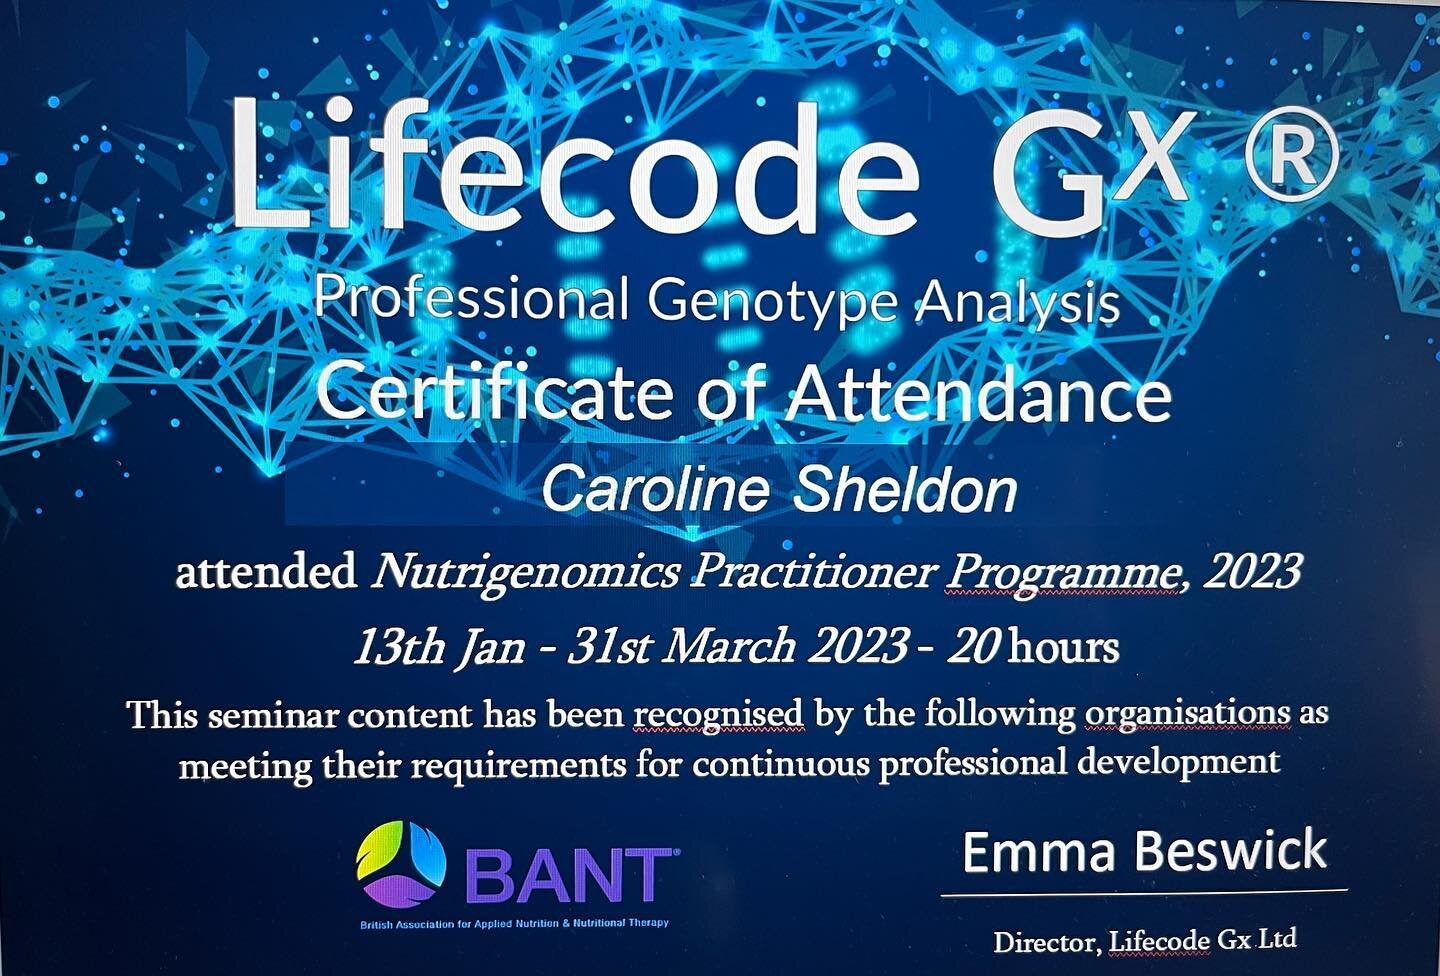 I am delighted to report that I am now a certified Lifecode Gx Nutrigenomics Practitioner. 

I use @lifecodegx's genetic panels in complex cases as they provide detailed insights into the underlying causes of my clients&rsquo; symptoms which we canno